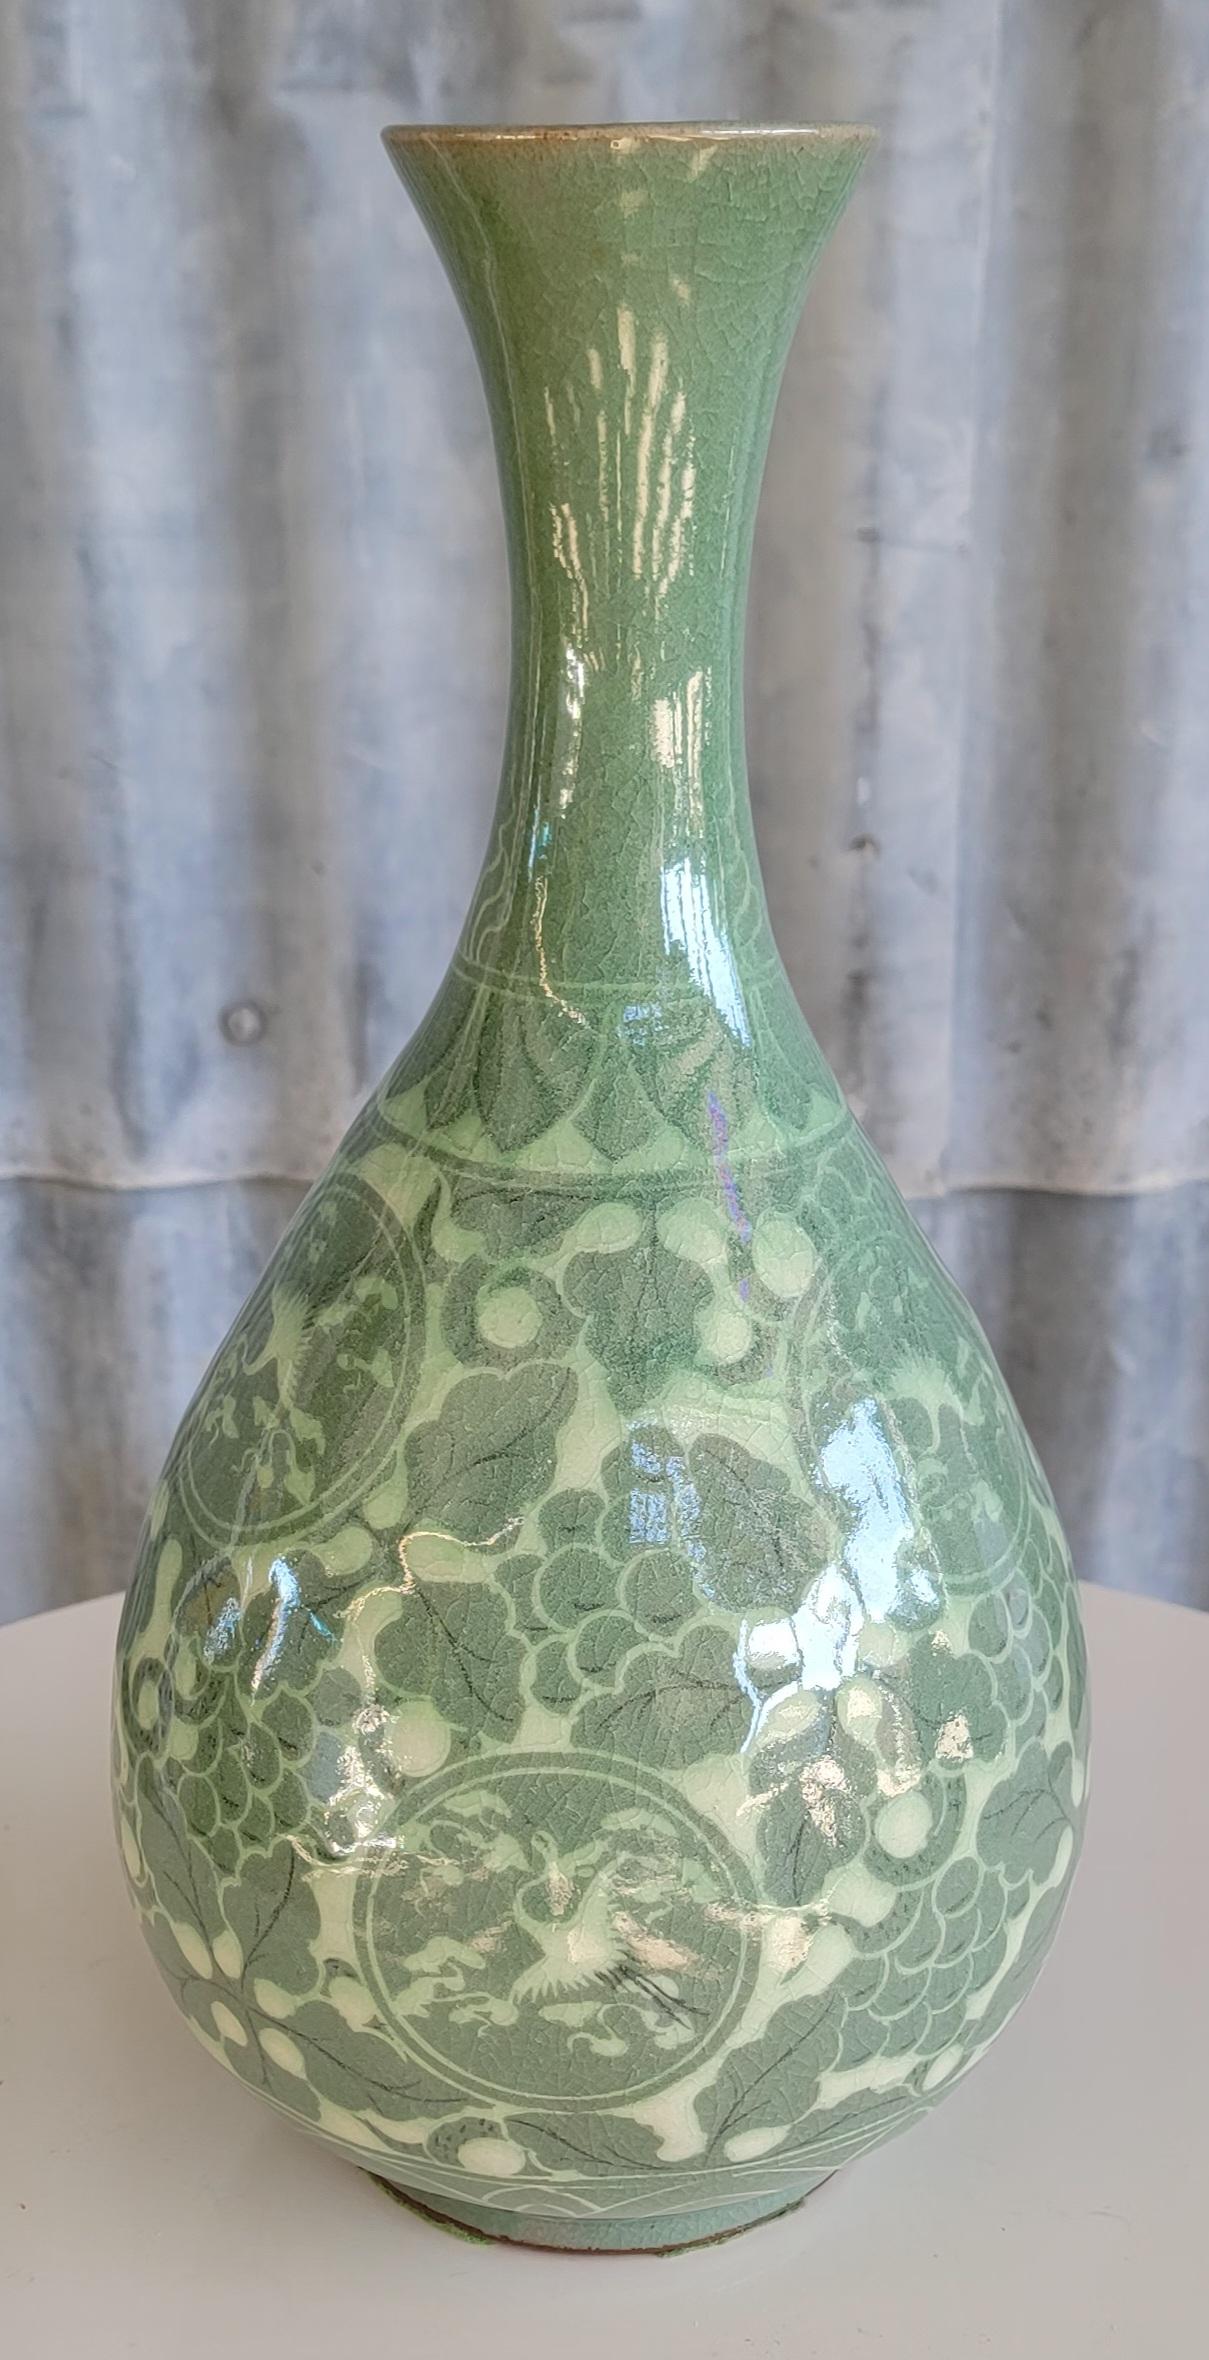 Beautifully decorated porcelain Celadon vase. Decoration appears to be grape vines with medallions of the Phoenix bird. Measures 12.13 inches tall. Faint, undecipherable signature on base. I believe this to be from the mid to late 20th century and